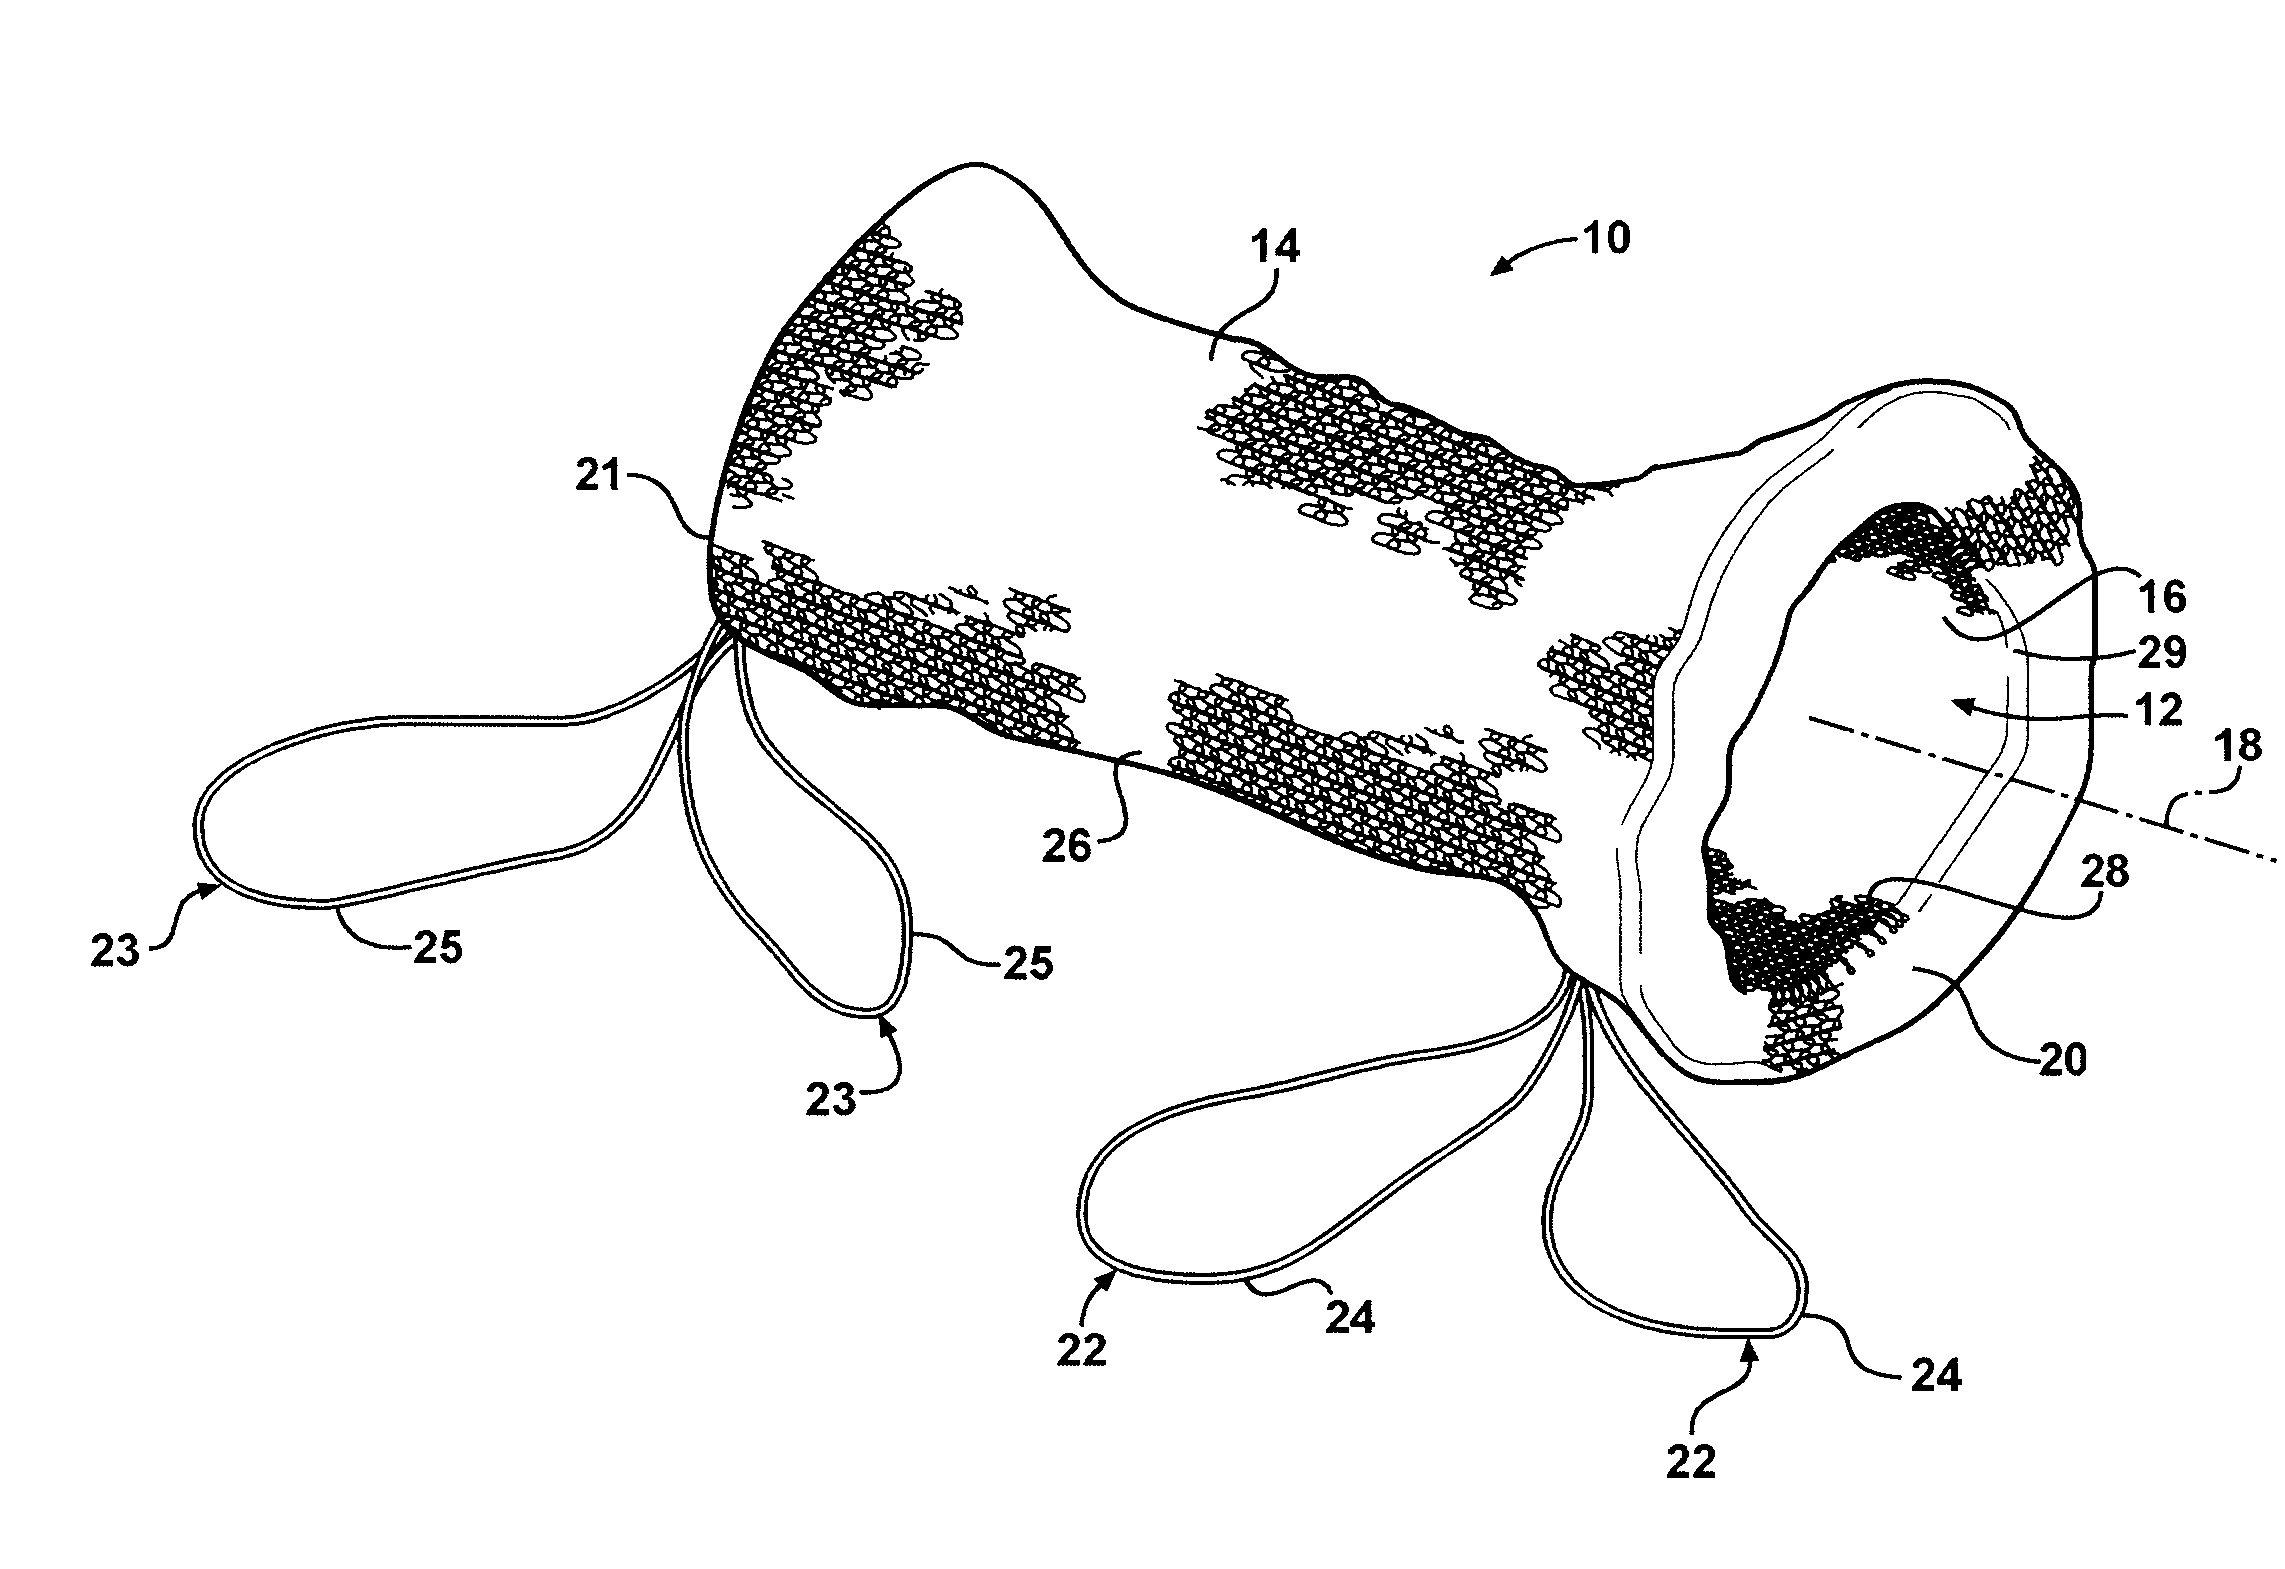 Protective sleeve assembly having an integral closure member and methods of manufacture and use thereof